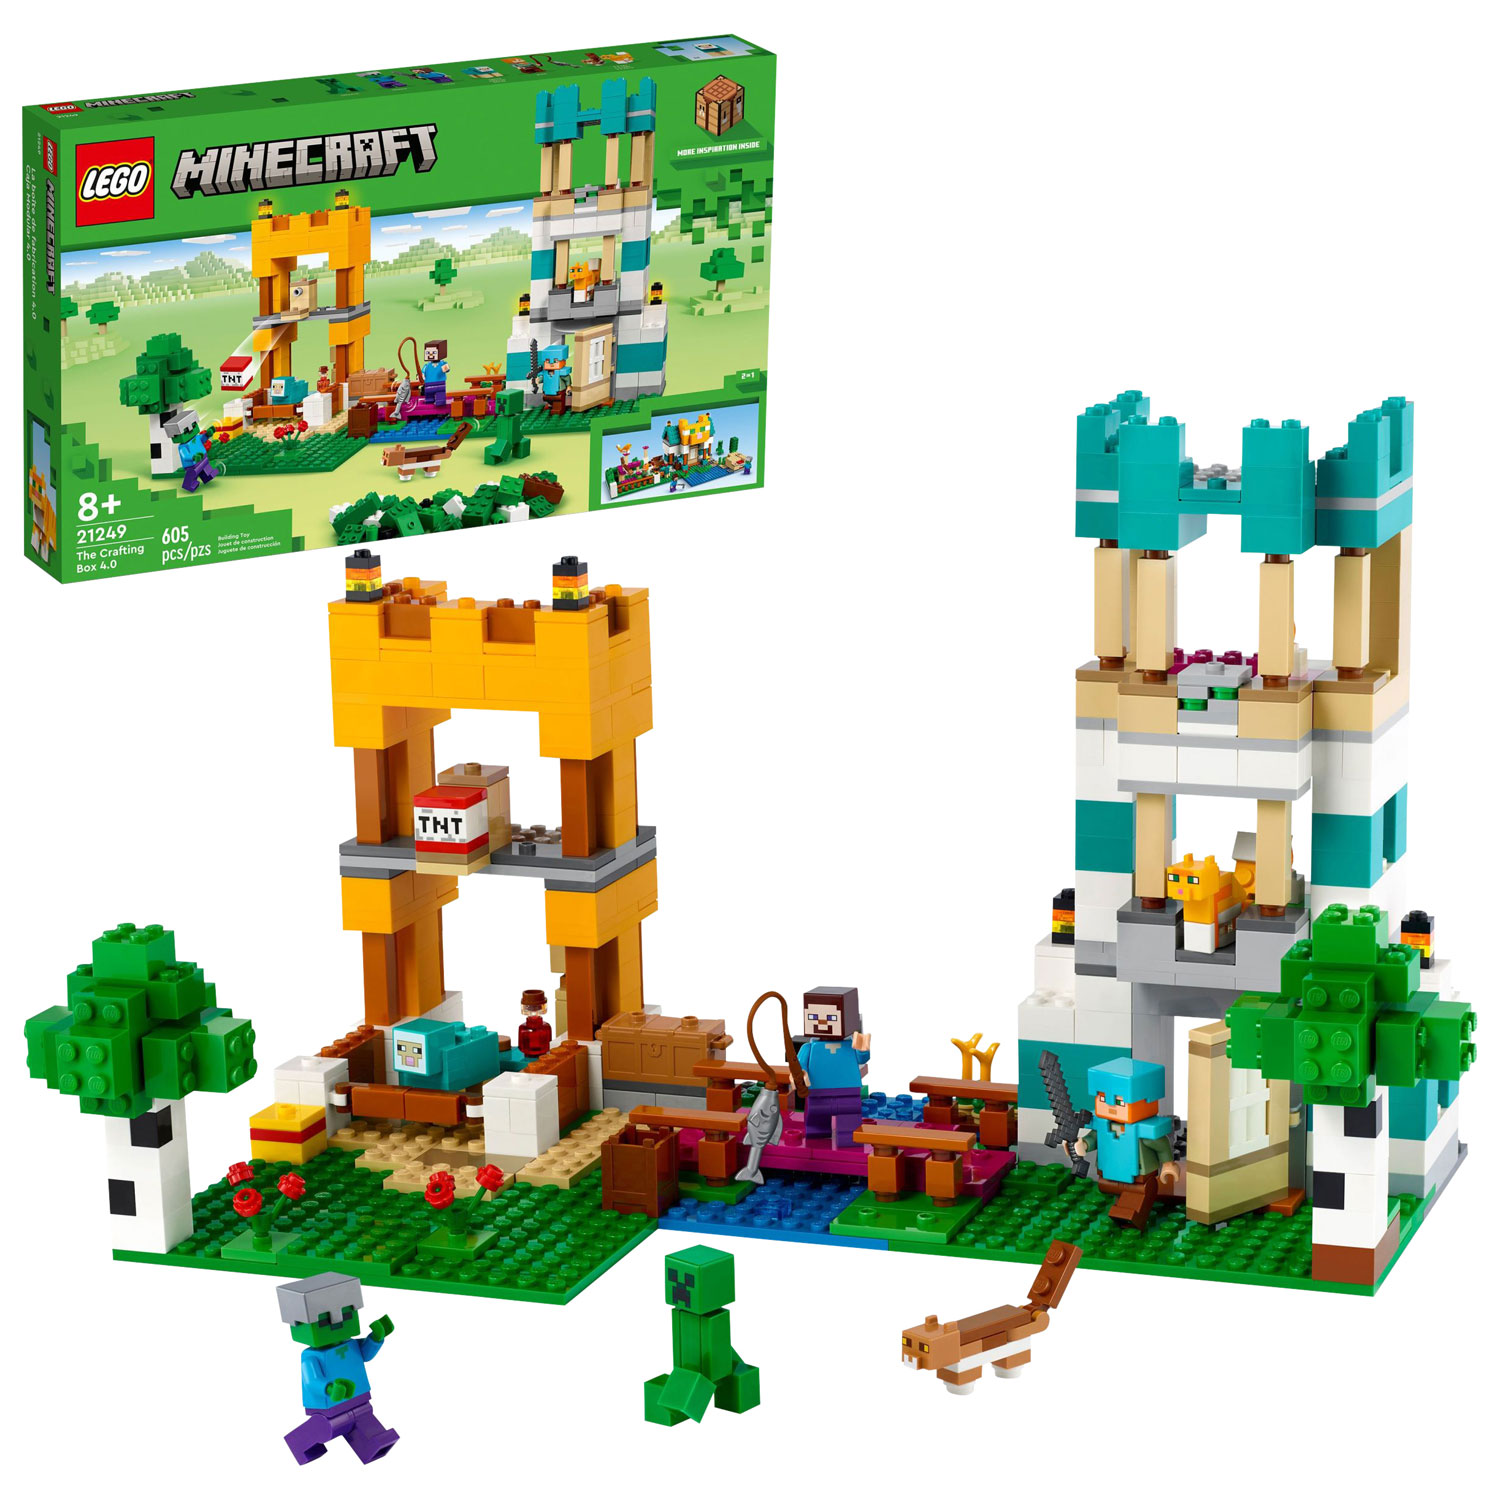 LEGO Minecraft: The Crafting Box 4.0 - 605 Pieces (21249)